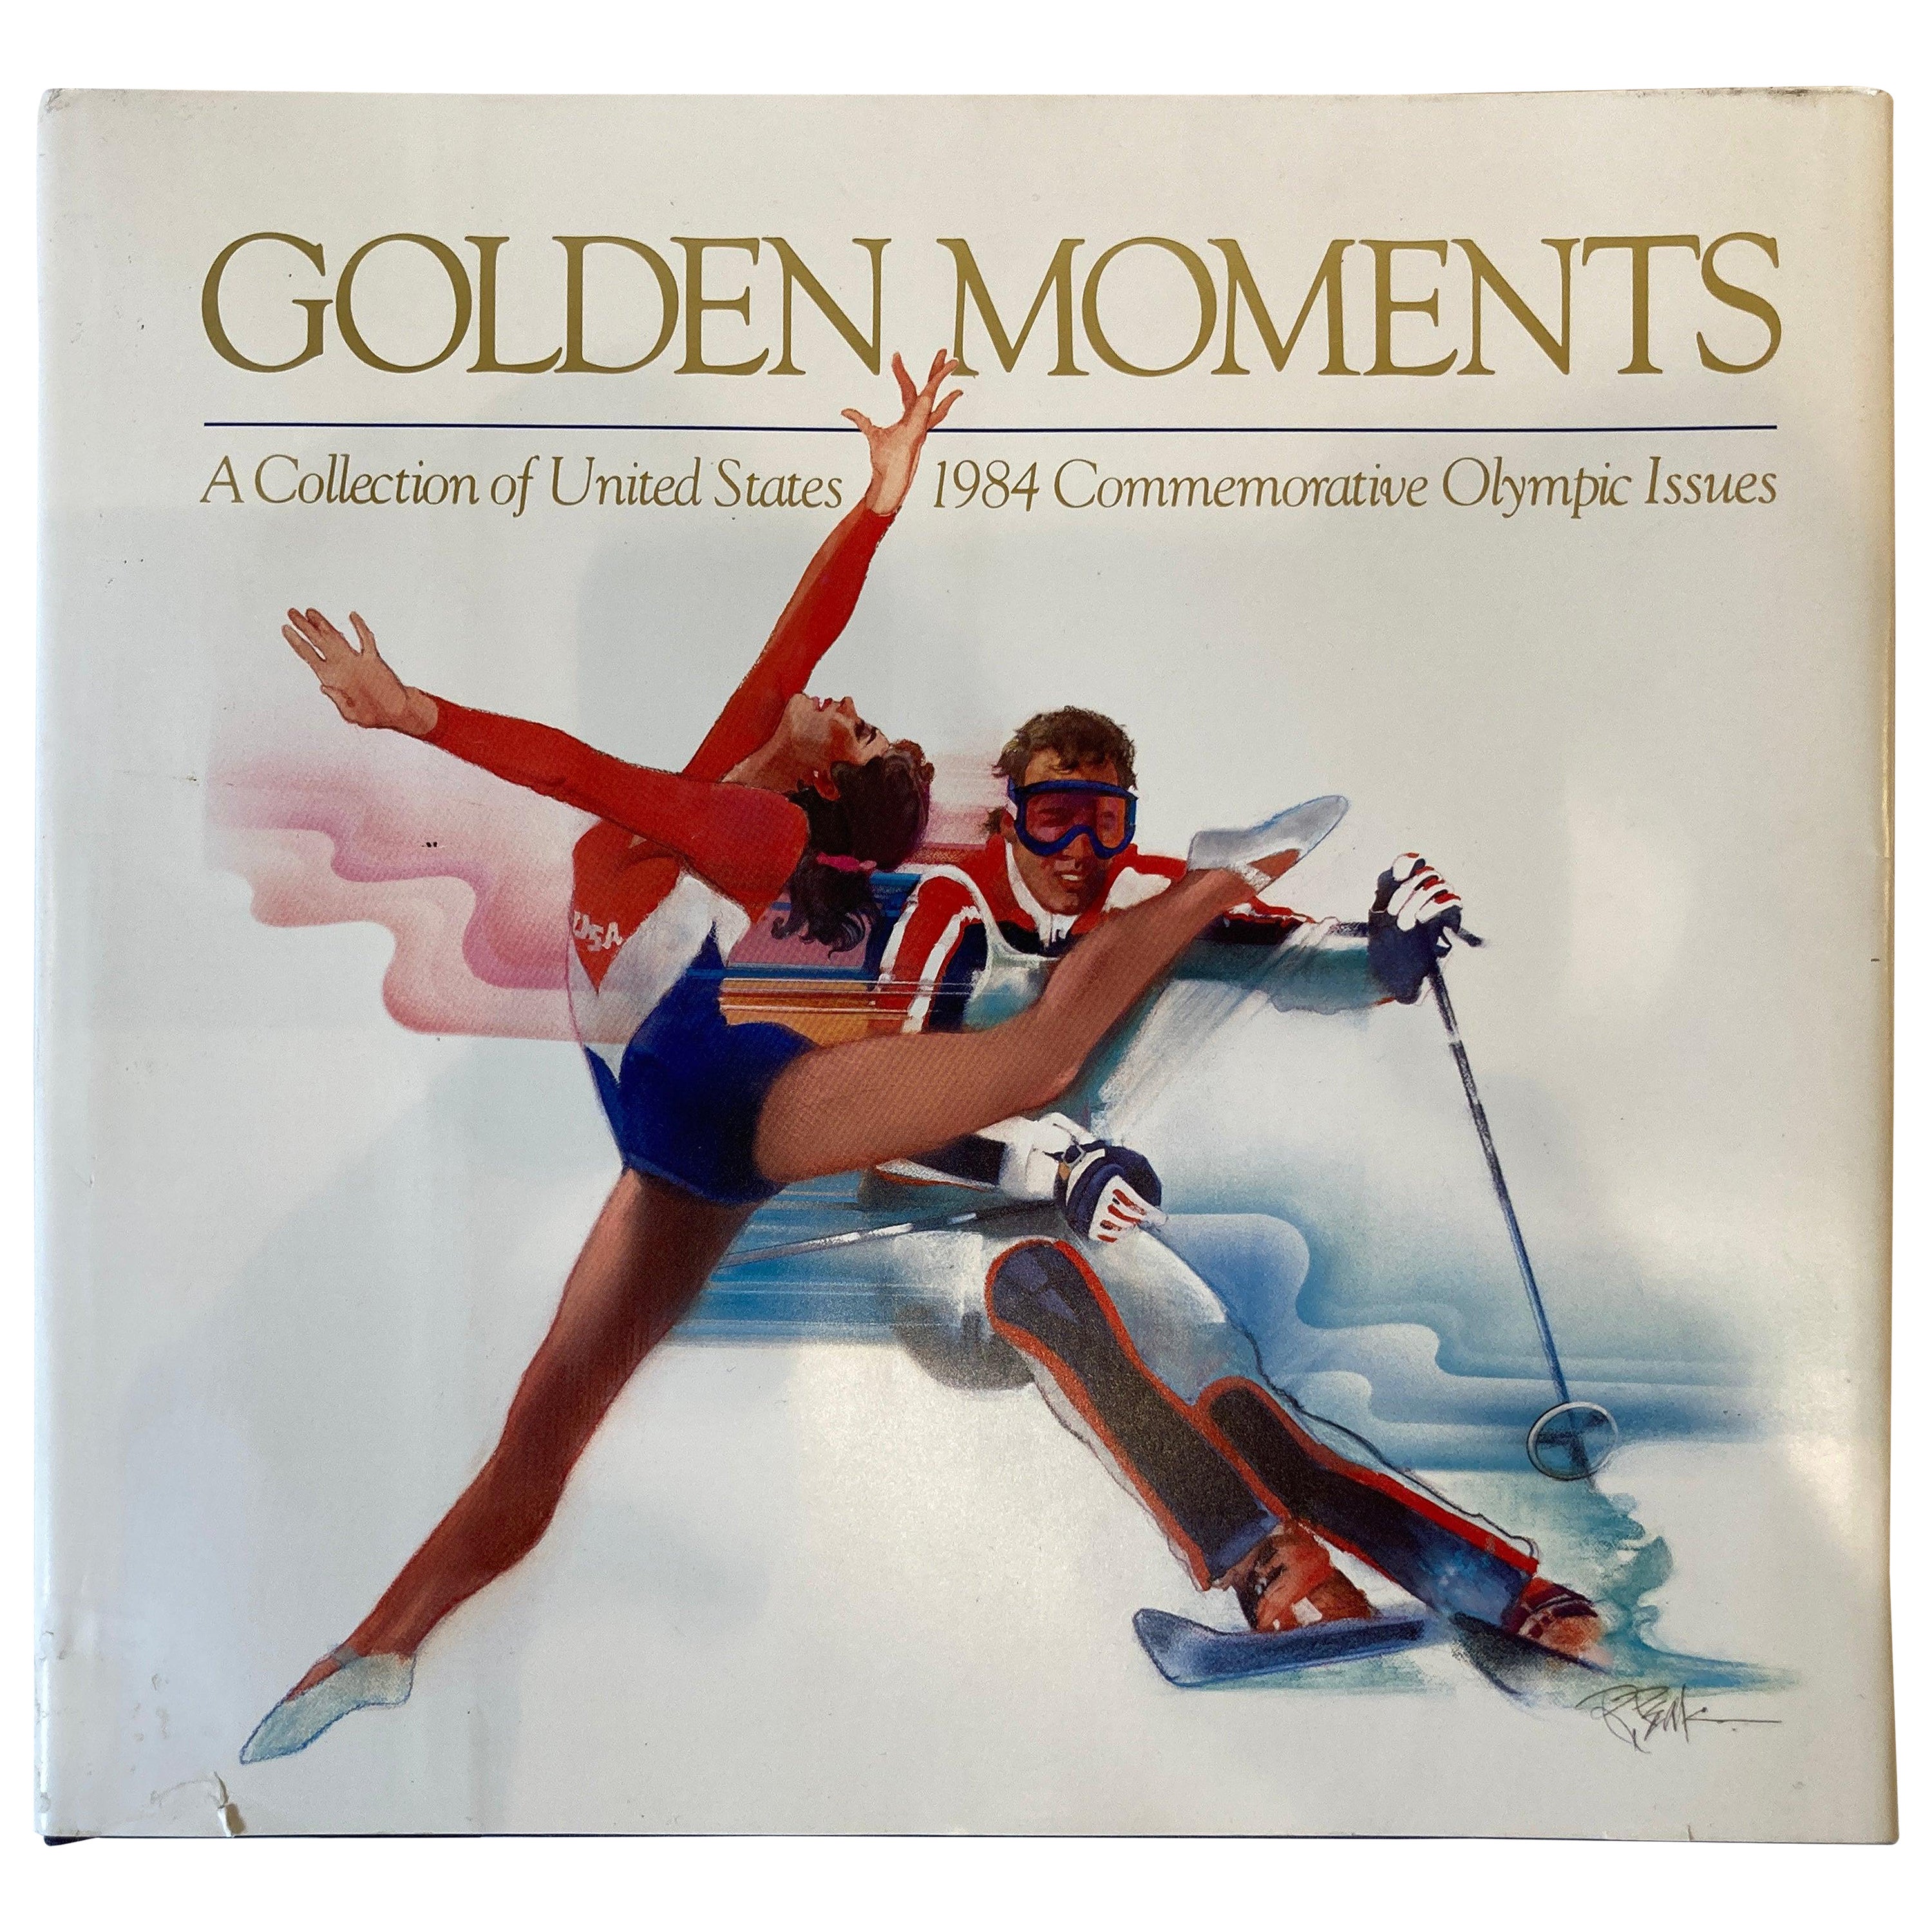 Golden Moments: a Collection of United States 1984 Commemorative Olympic Issues